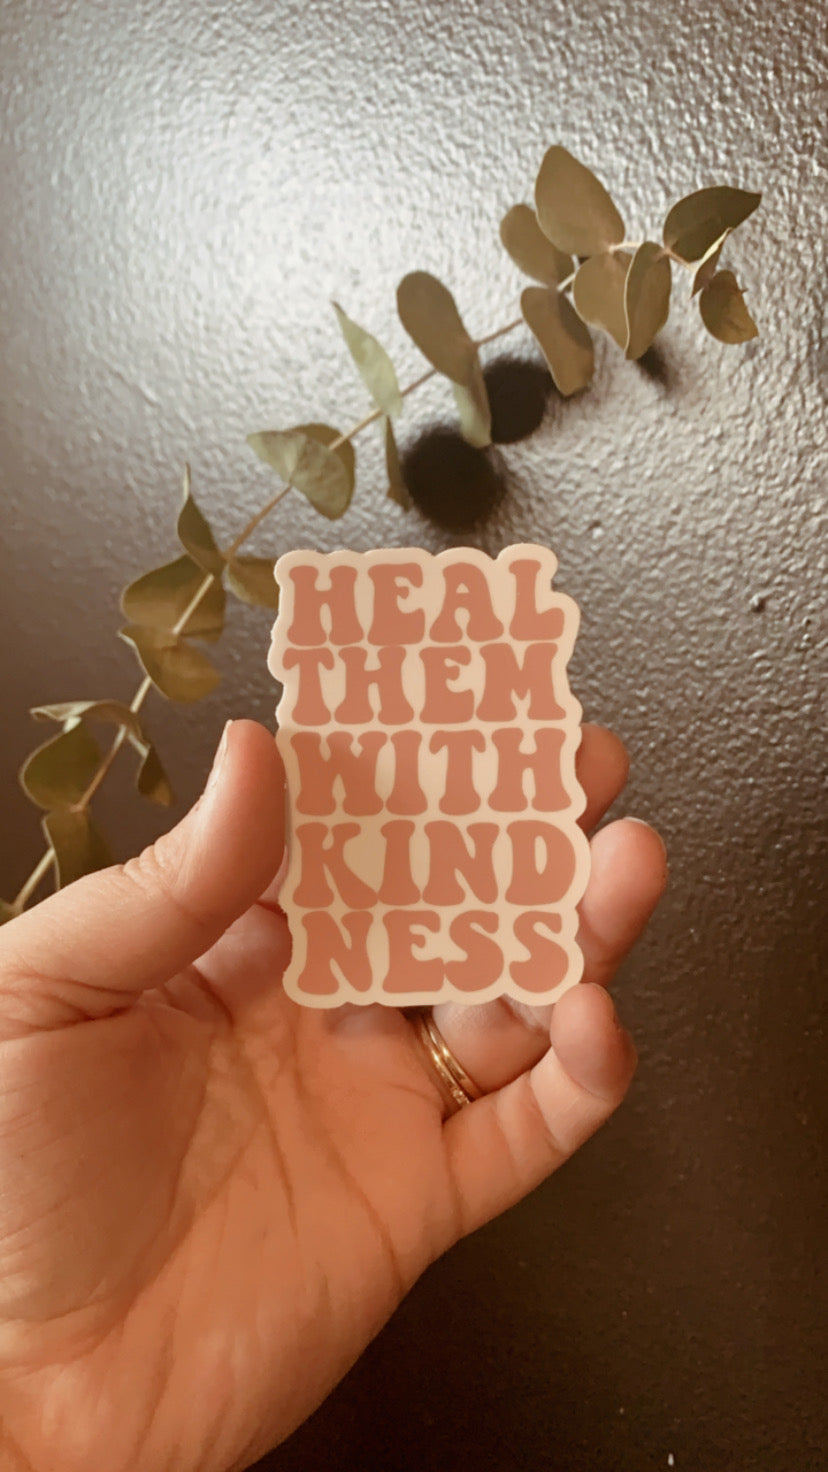 HEAL THEM WITH KINDNESS STICKER